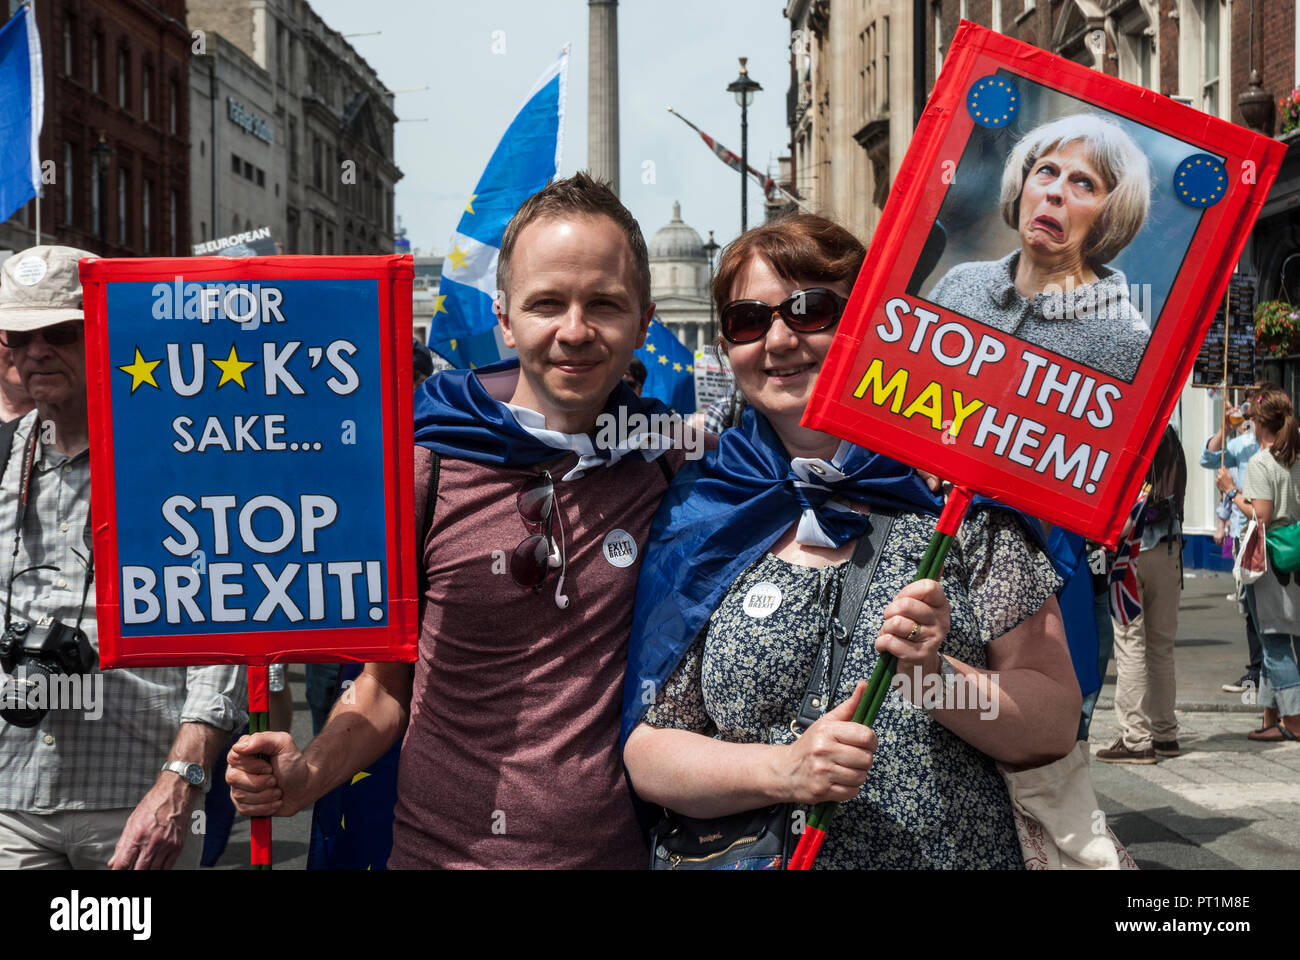 Young smiling couple holding humorous placards 'For *U*KS sake stop Brexit', 'Stop this Mayhem' with a gurning picture of Teresa May. Stock Photo